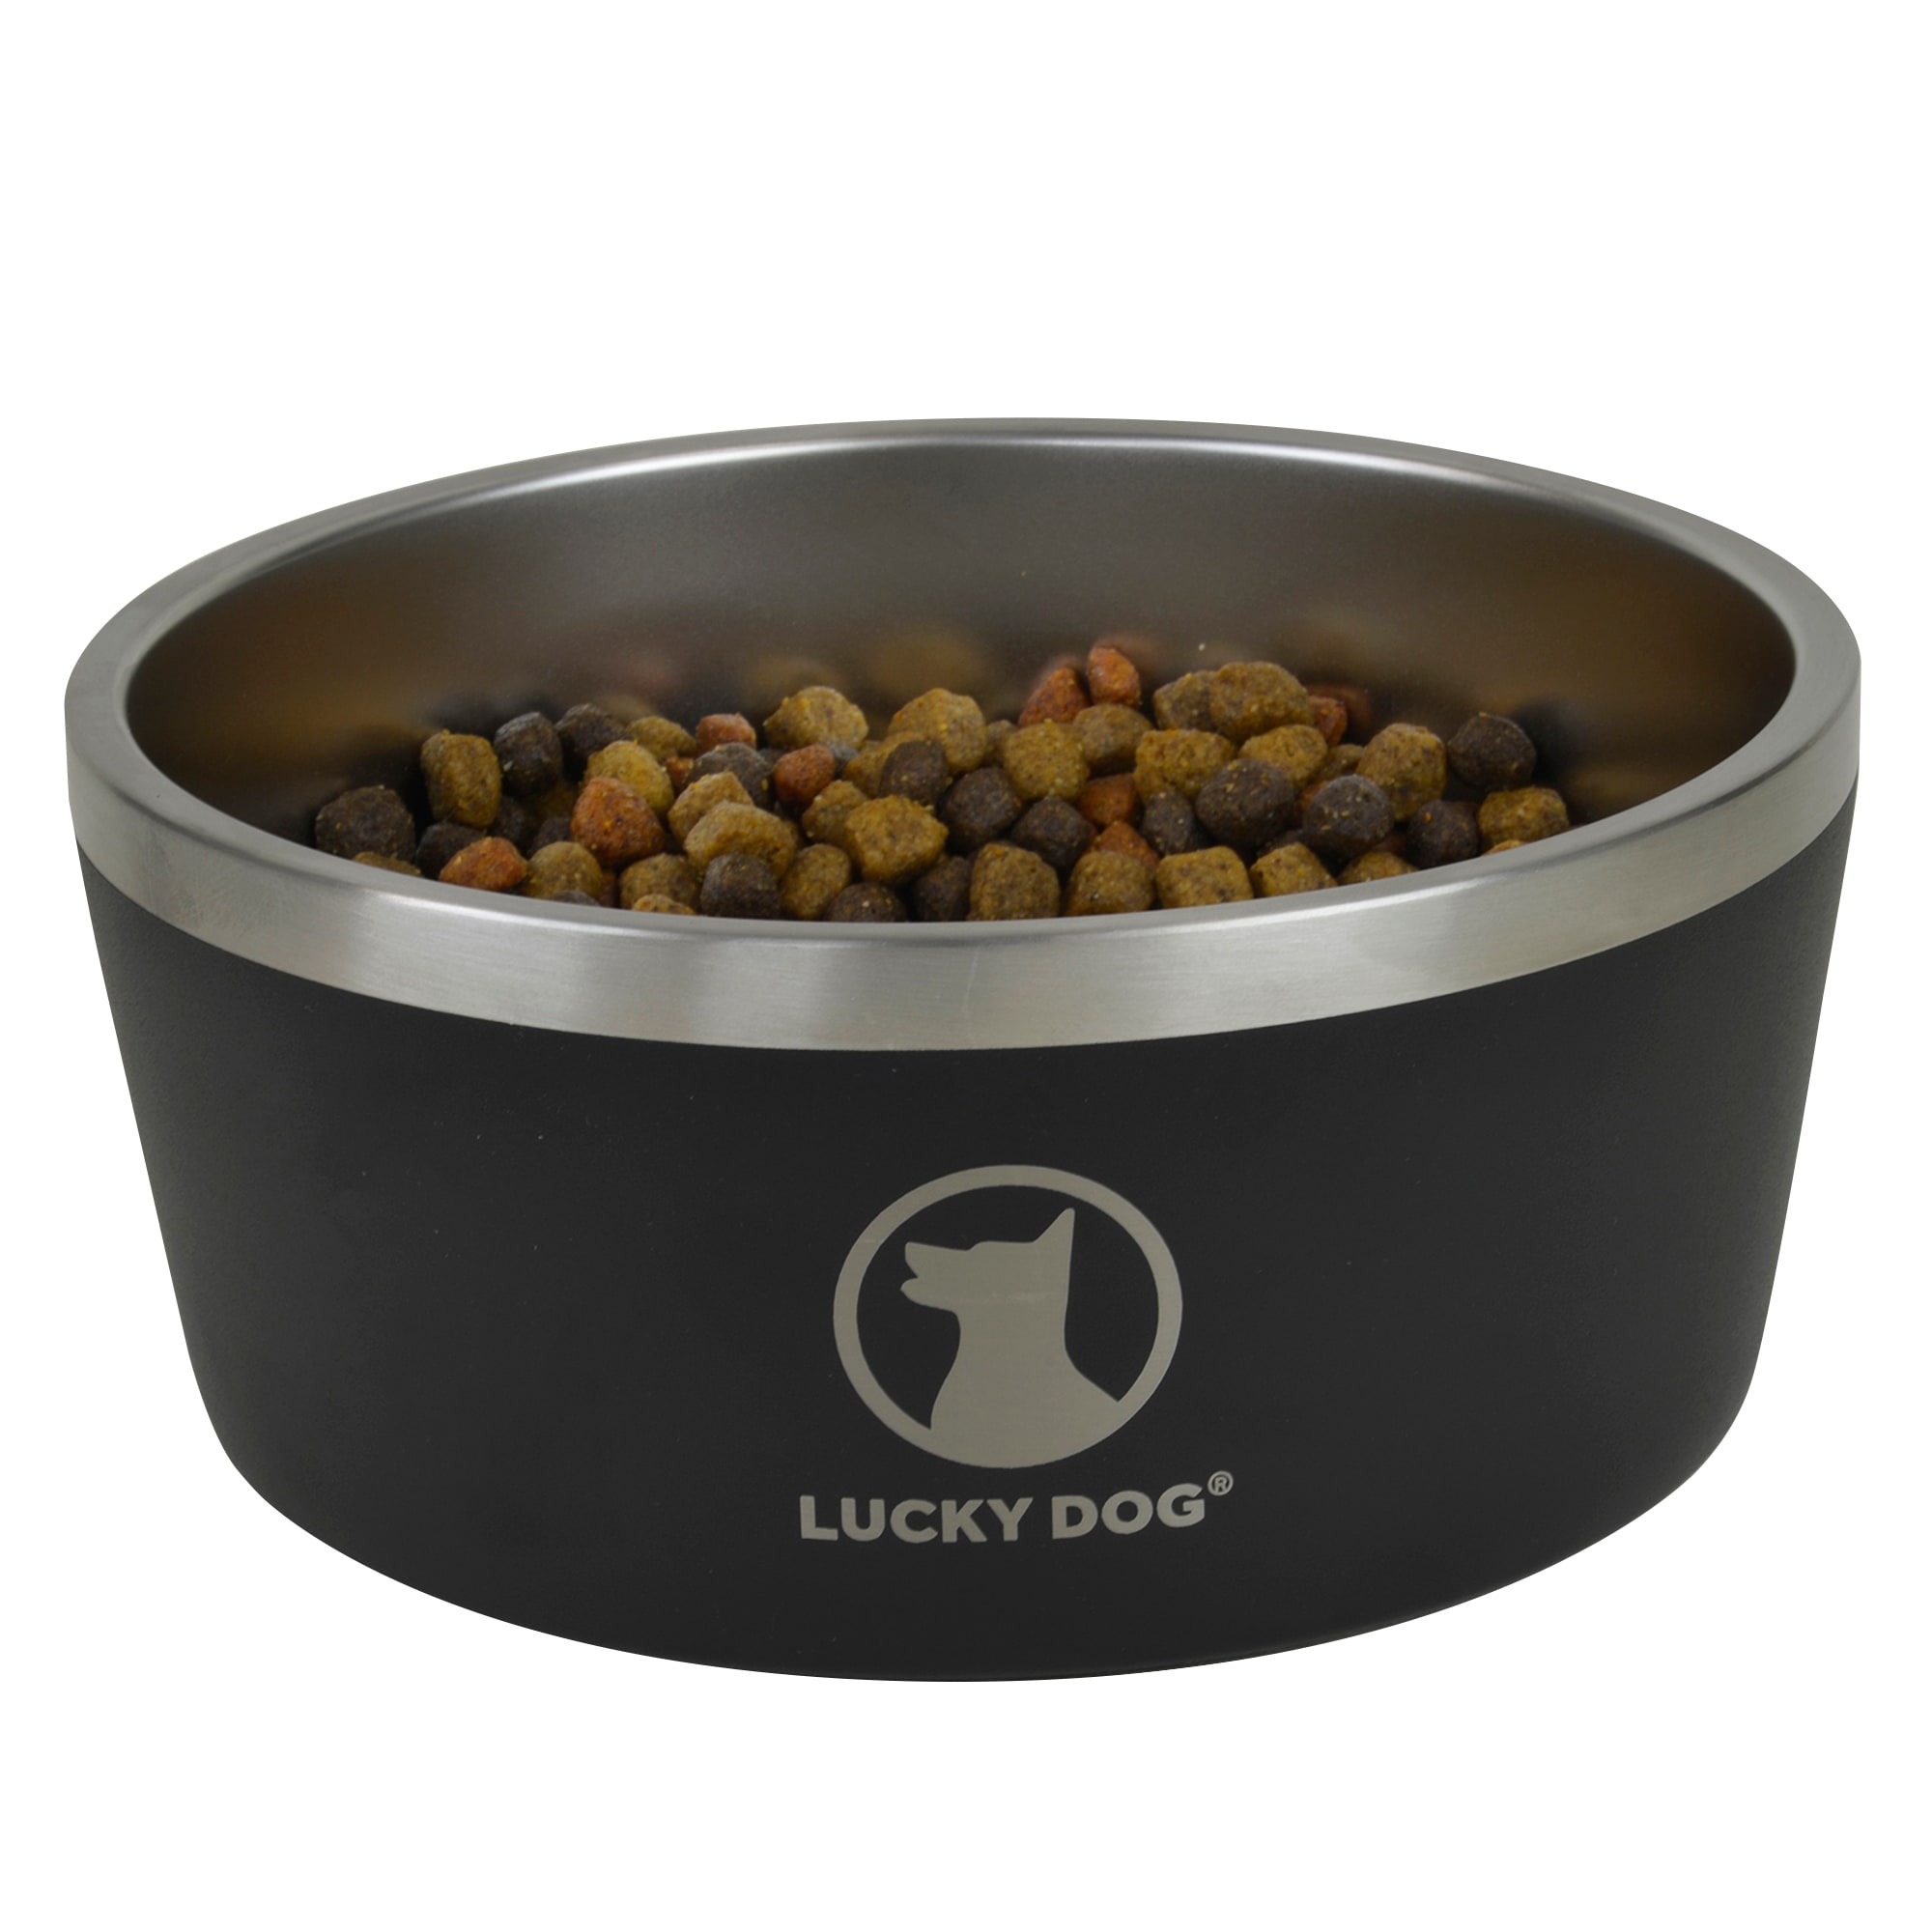 https://ak1.ostkcdn.com/images/products/is/images/direct/263114c4209d4598c37ef222794e33a37f1b8634/Lucky-Dog-INDULGE-Double-Wall-Stainless-Steel-Dog-Bowl-Non-Slip-Lifetime-Warranty.jpg